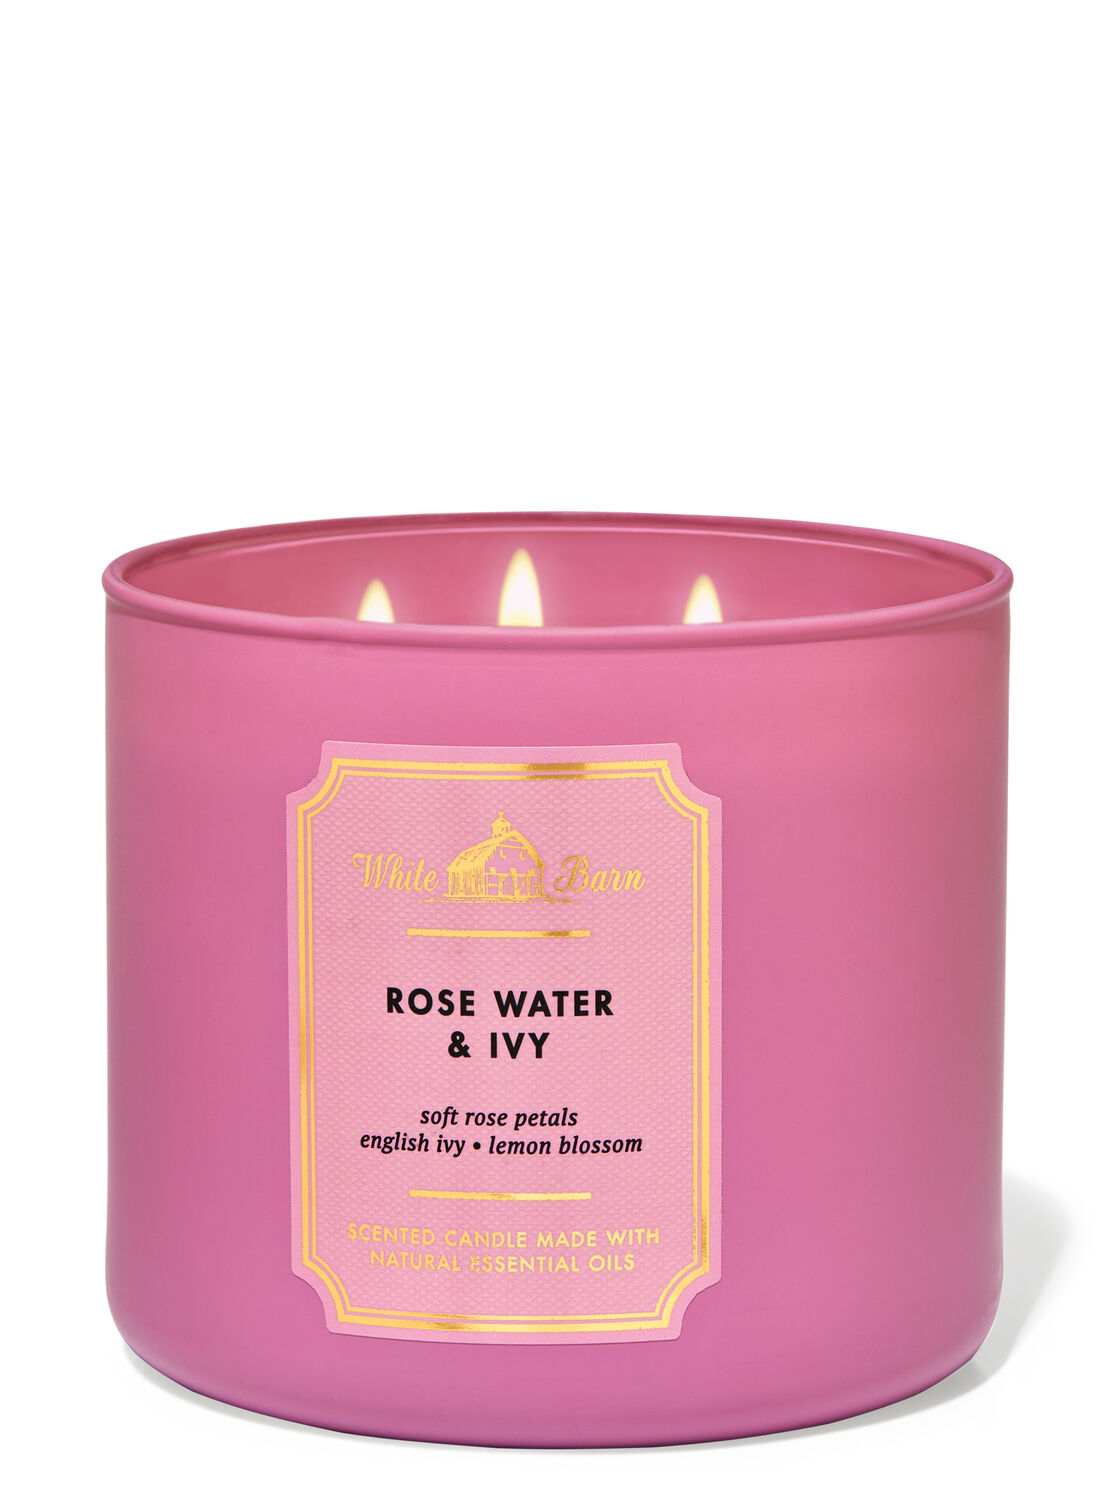 NEW BATH & BODY WORKS LIMONCELLO SCENTED CANDLE 3 WICK 14.5 OZ LARGE WHITE BARN